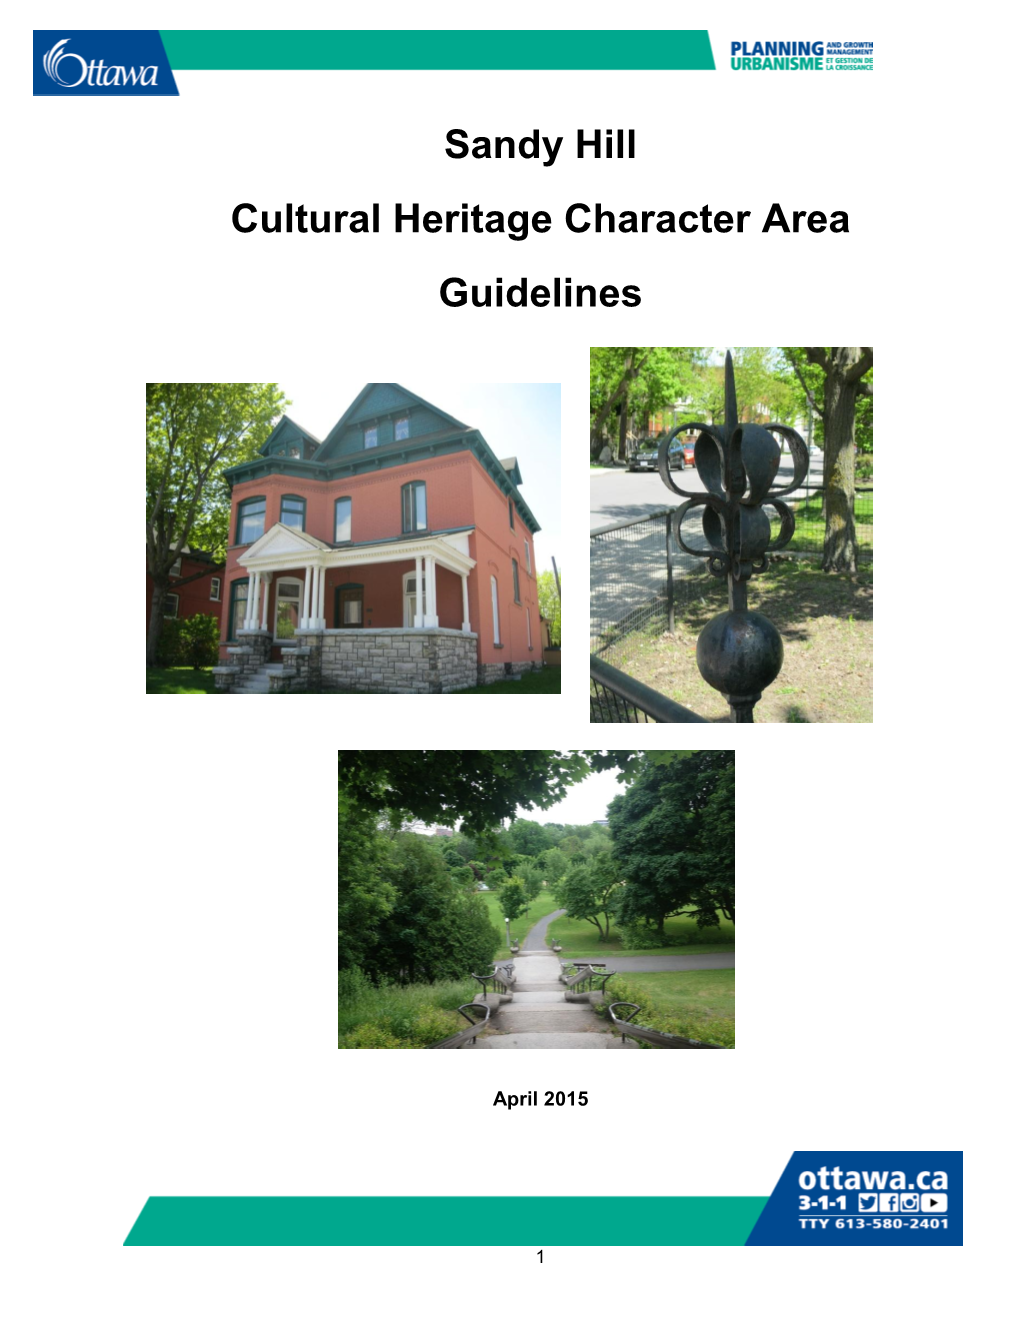 Sandy Hill Cultural Heritage Character Area Guidelines